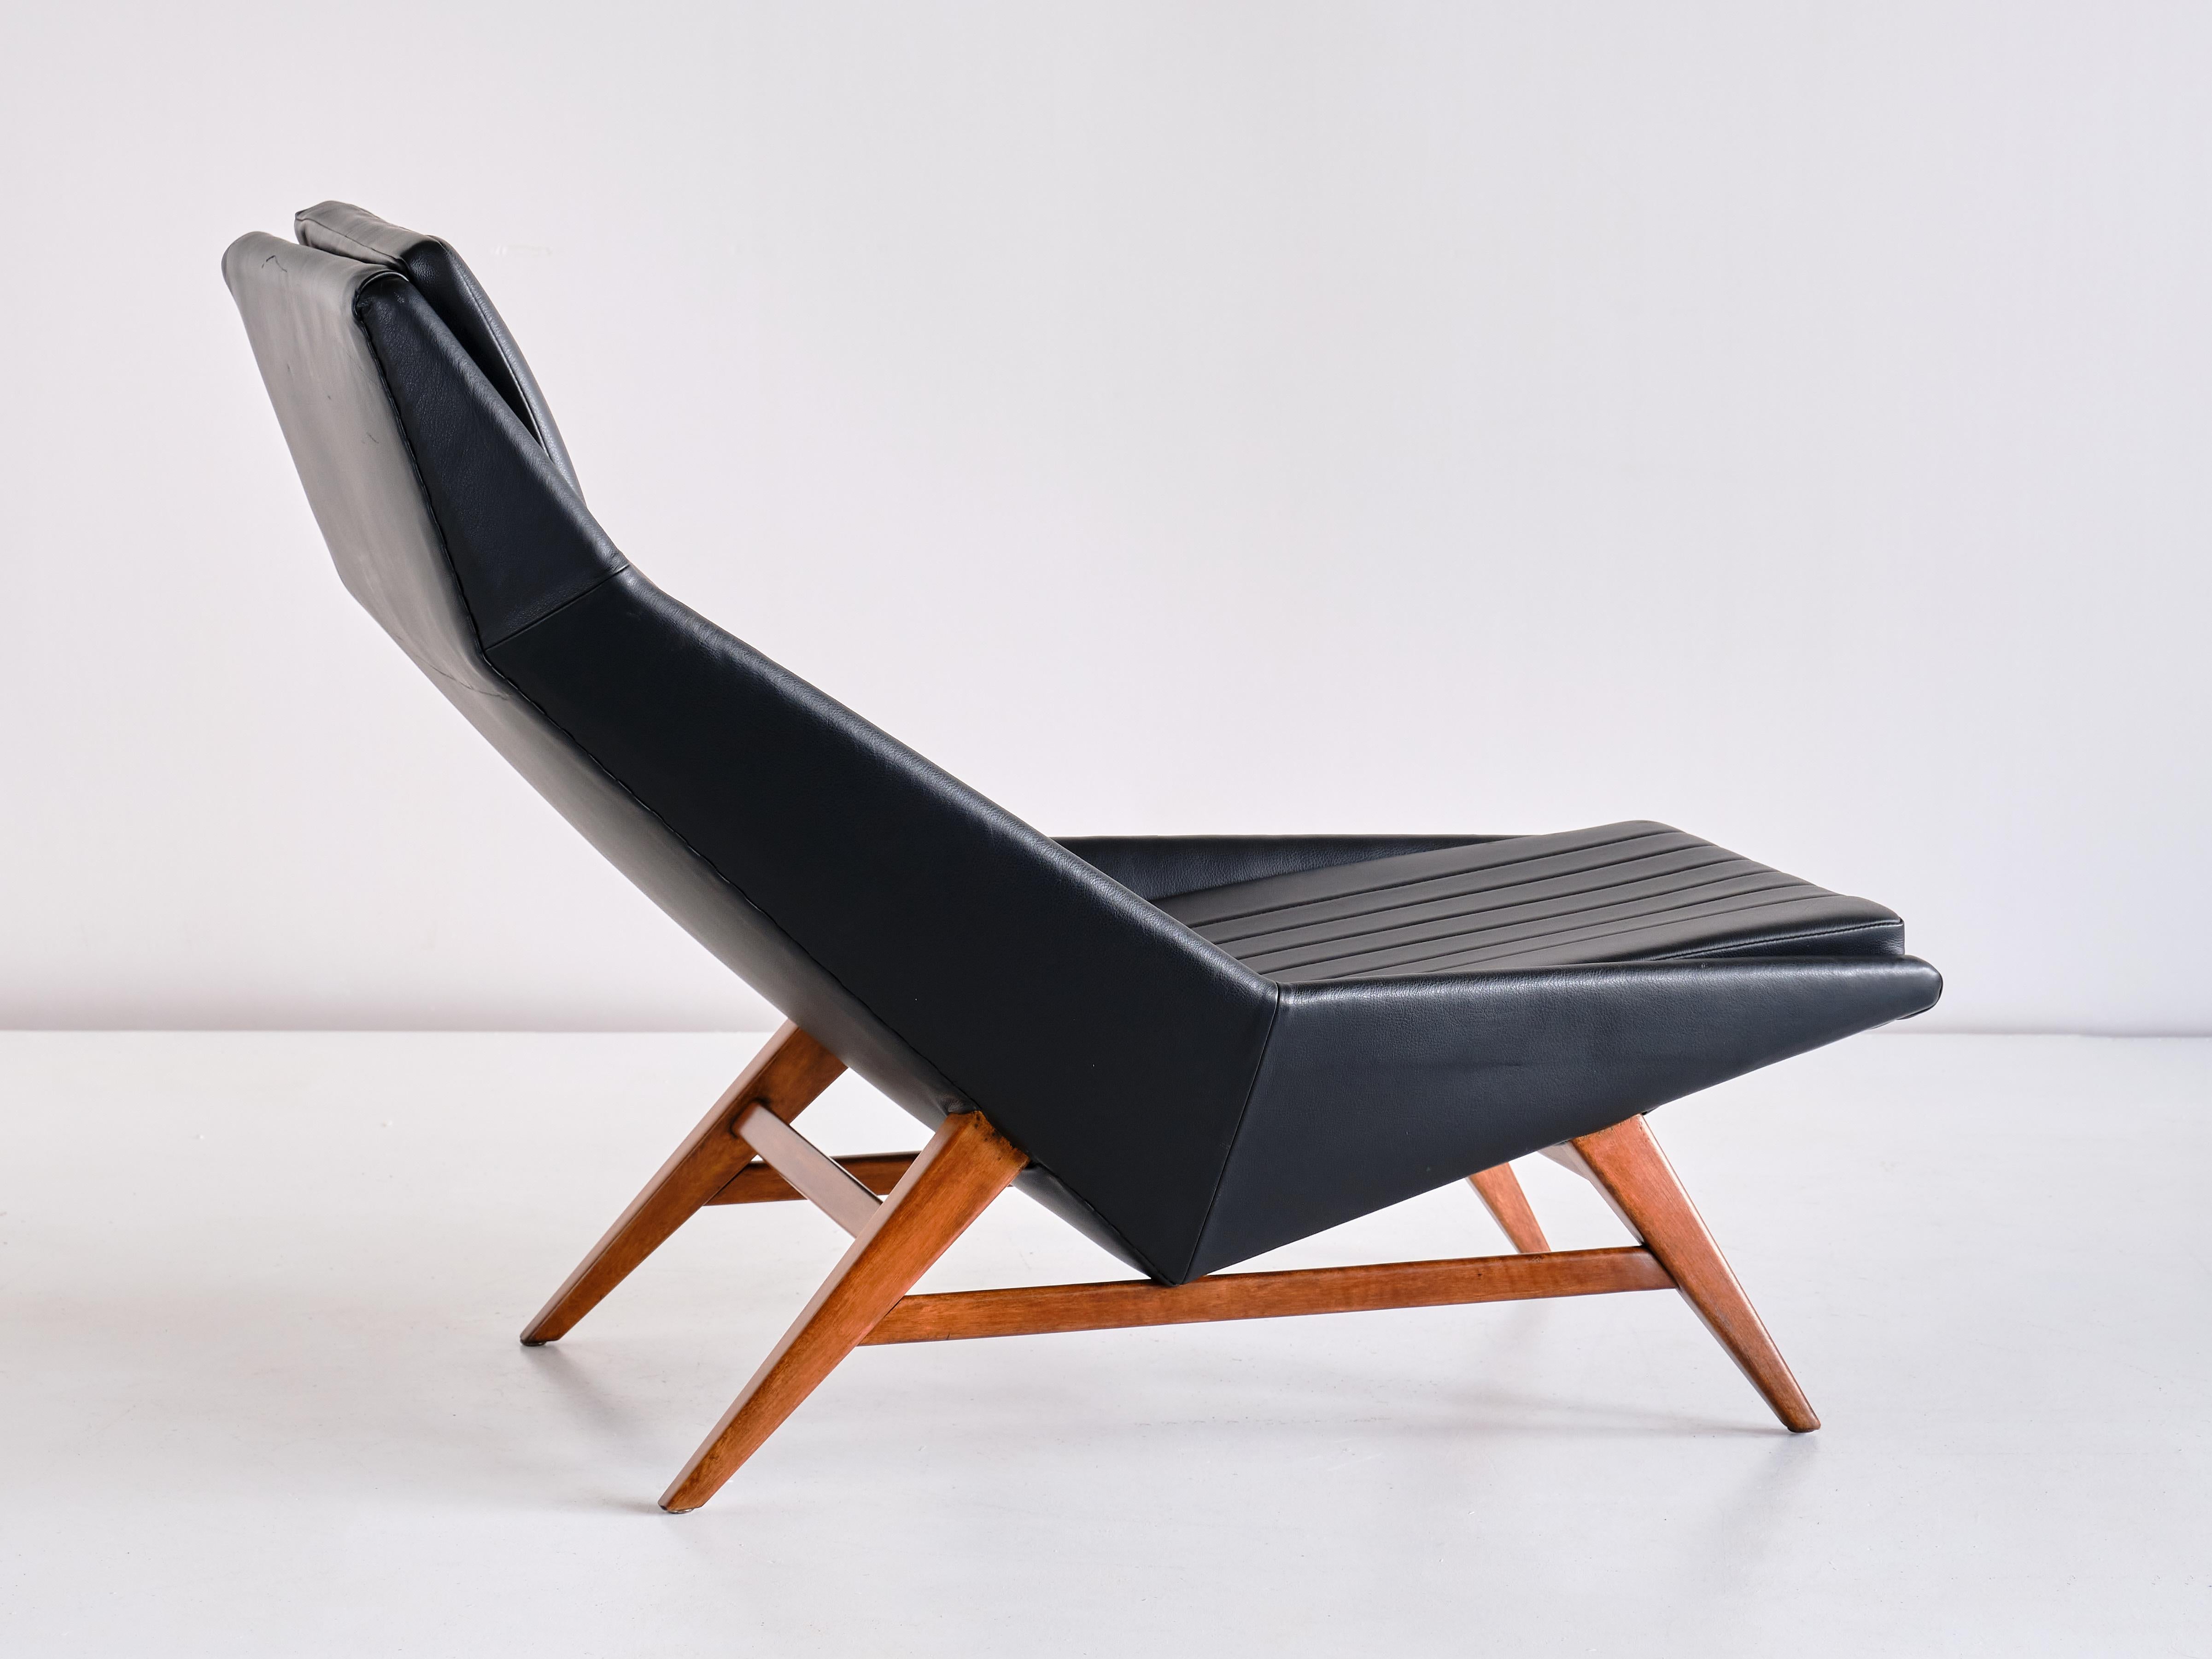 Scandinavian Modern Svante Skogh Lounge Chair in Leather and Beech, AB Hjertquist & Co, Sweden, 1955 For Sale